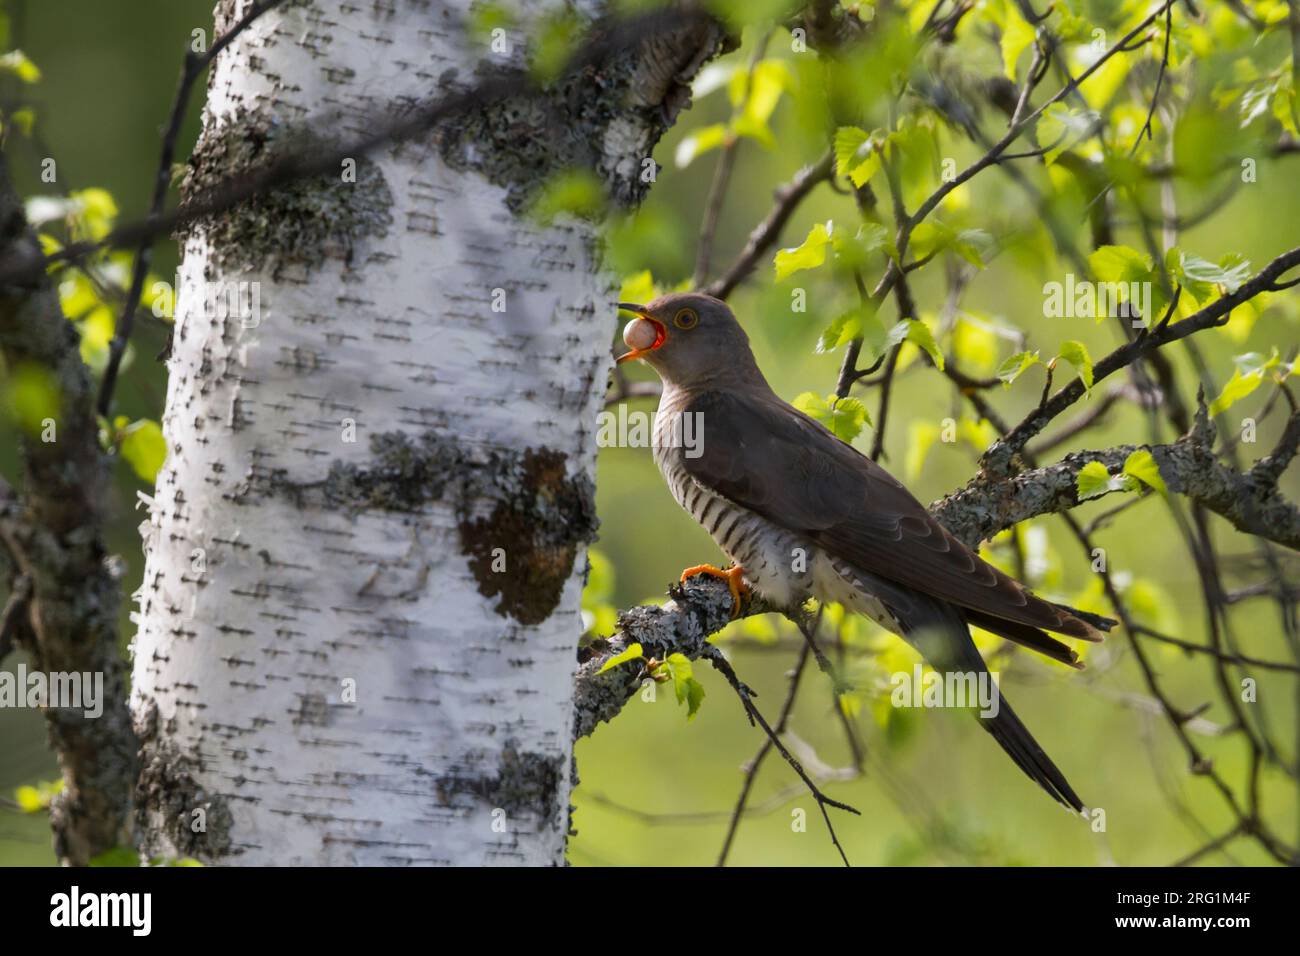 Common Cuckoo (Cuculus canorus ssp. subtelephonus), Kazakhstan, adult, female with egg stolen from host nest of her own egg, to throw the egg away. Stock Photo